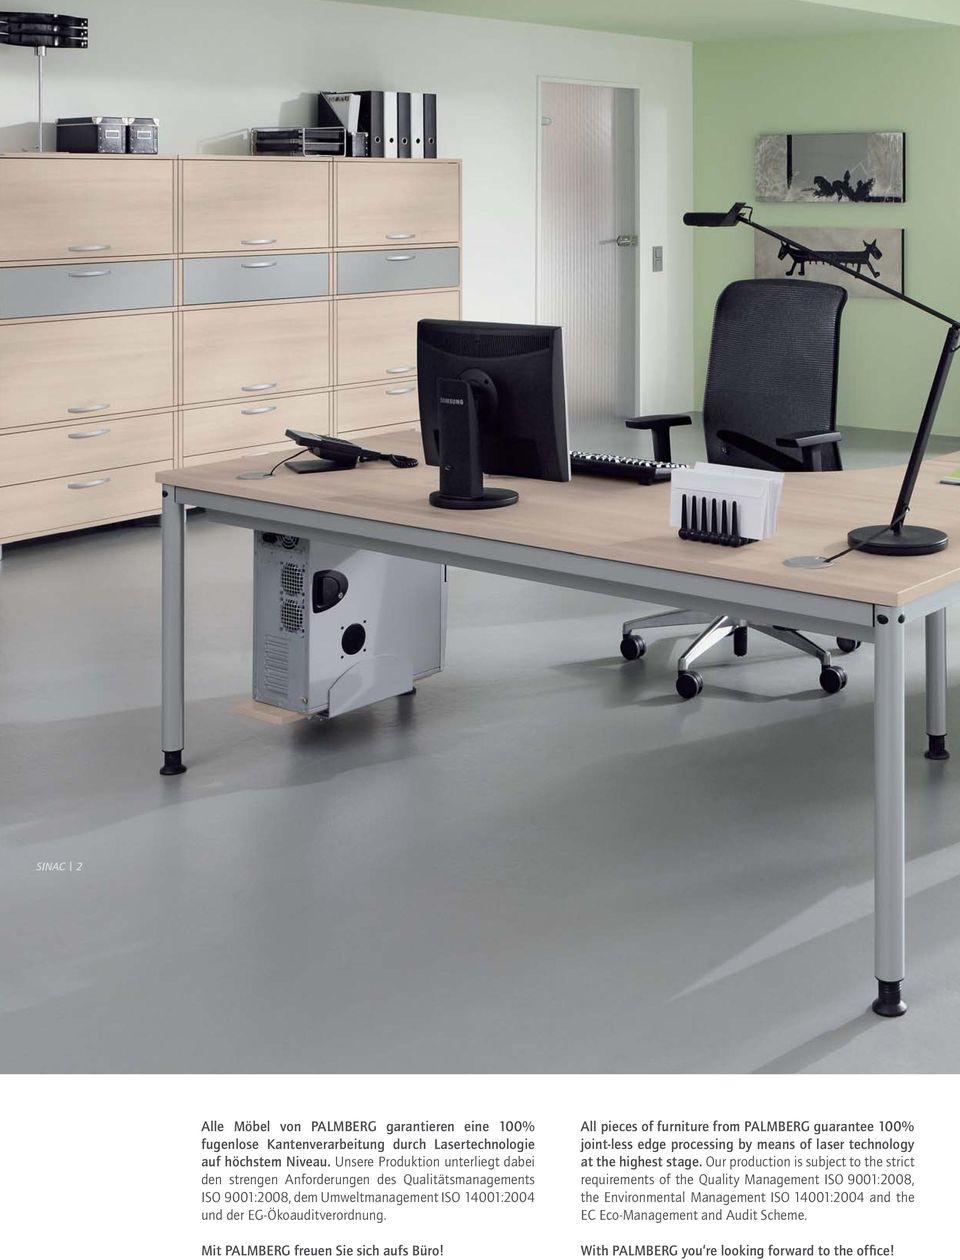 Mit PALMBERG freuen Sie sich aufs Büro! All pieces of furniture from PALMBERG guarantee 100% joint-less edge processing by means of laser technology at the highest stage.